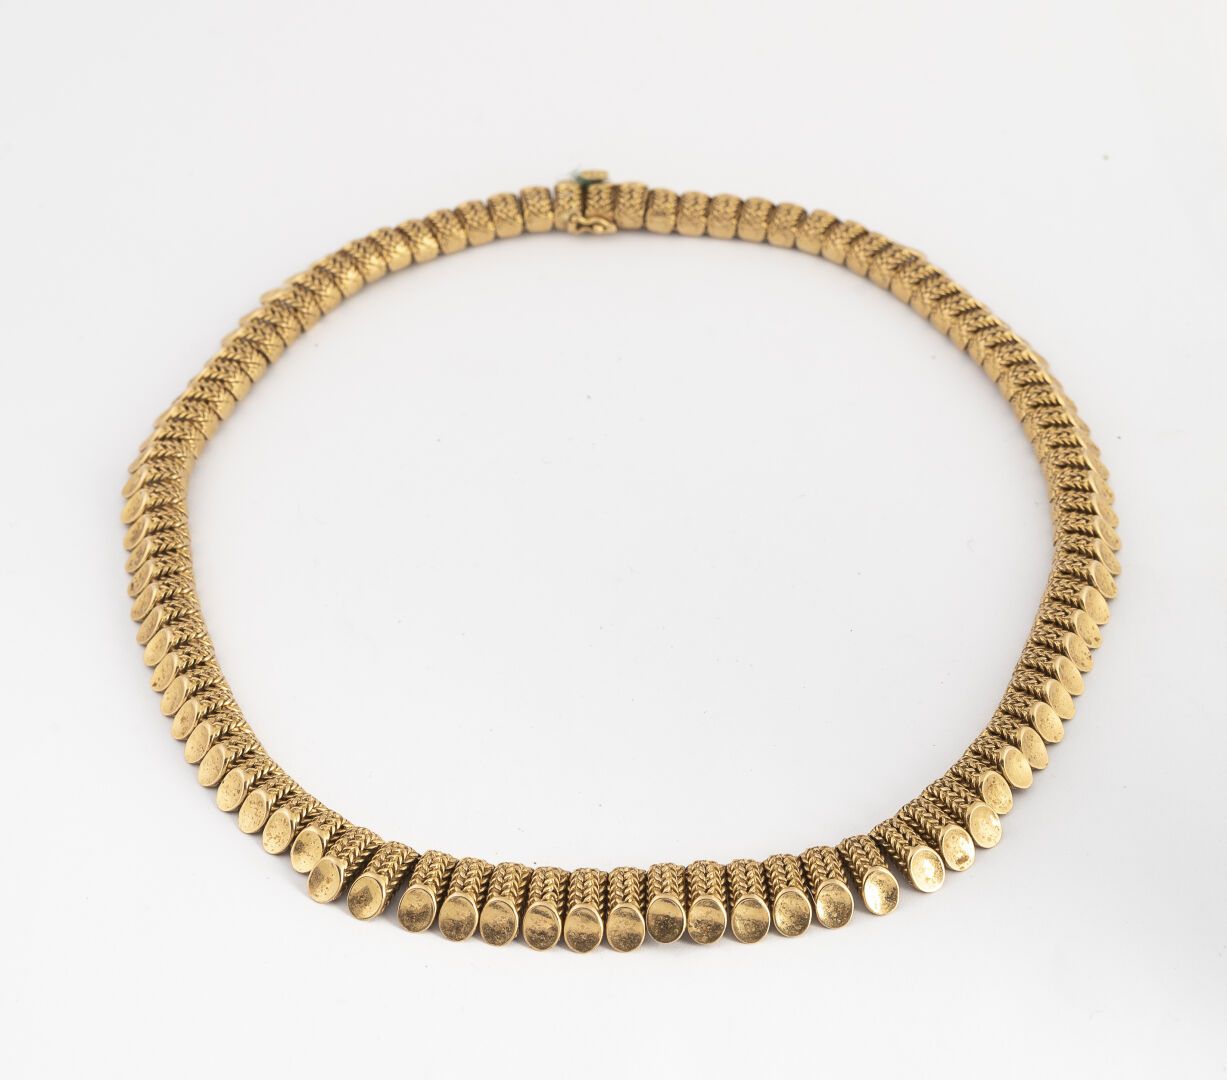 Null DRAPERY NECKLACE

In 750°/°° gold

With pressed gourmet links

Circa 1950

&hellip;